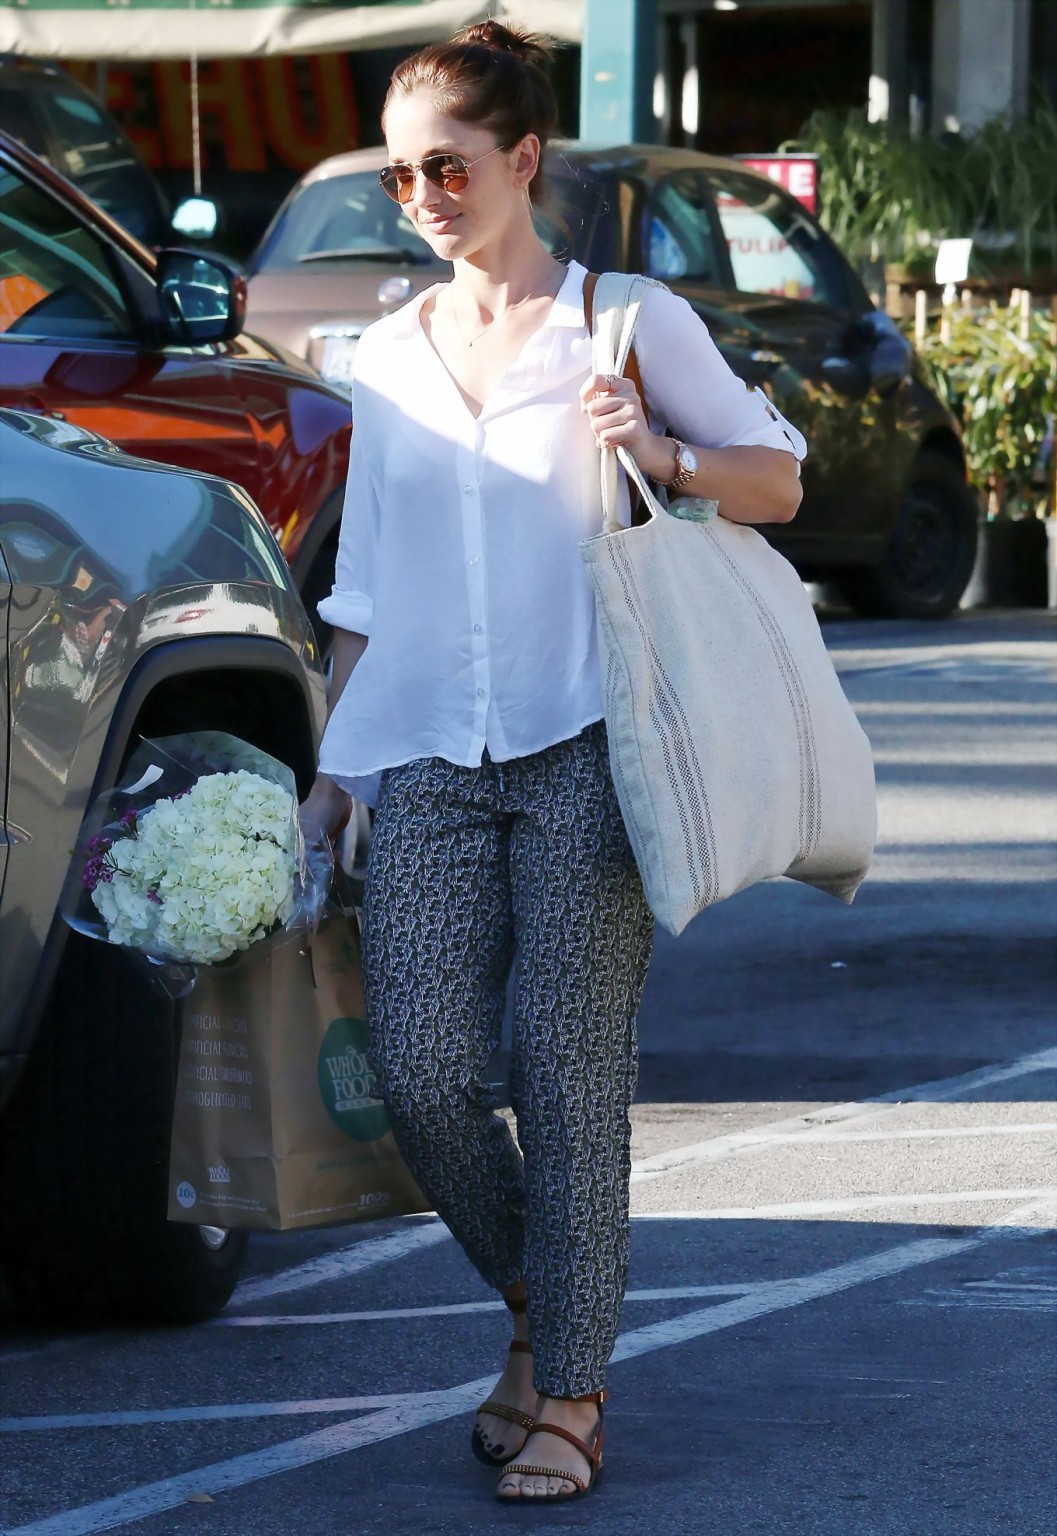 Minka Kelly showing pokies in white slightly transparent shirt while shopping in #75170723